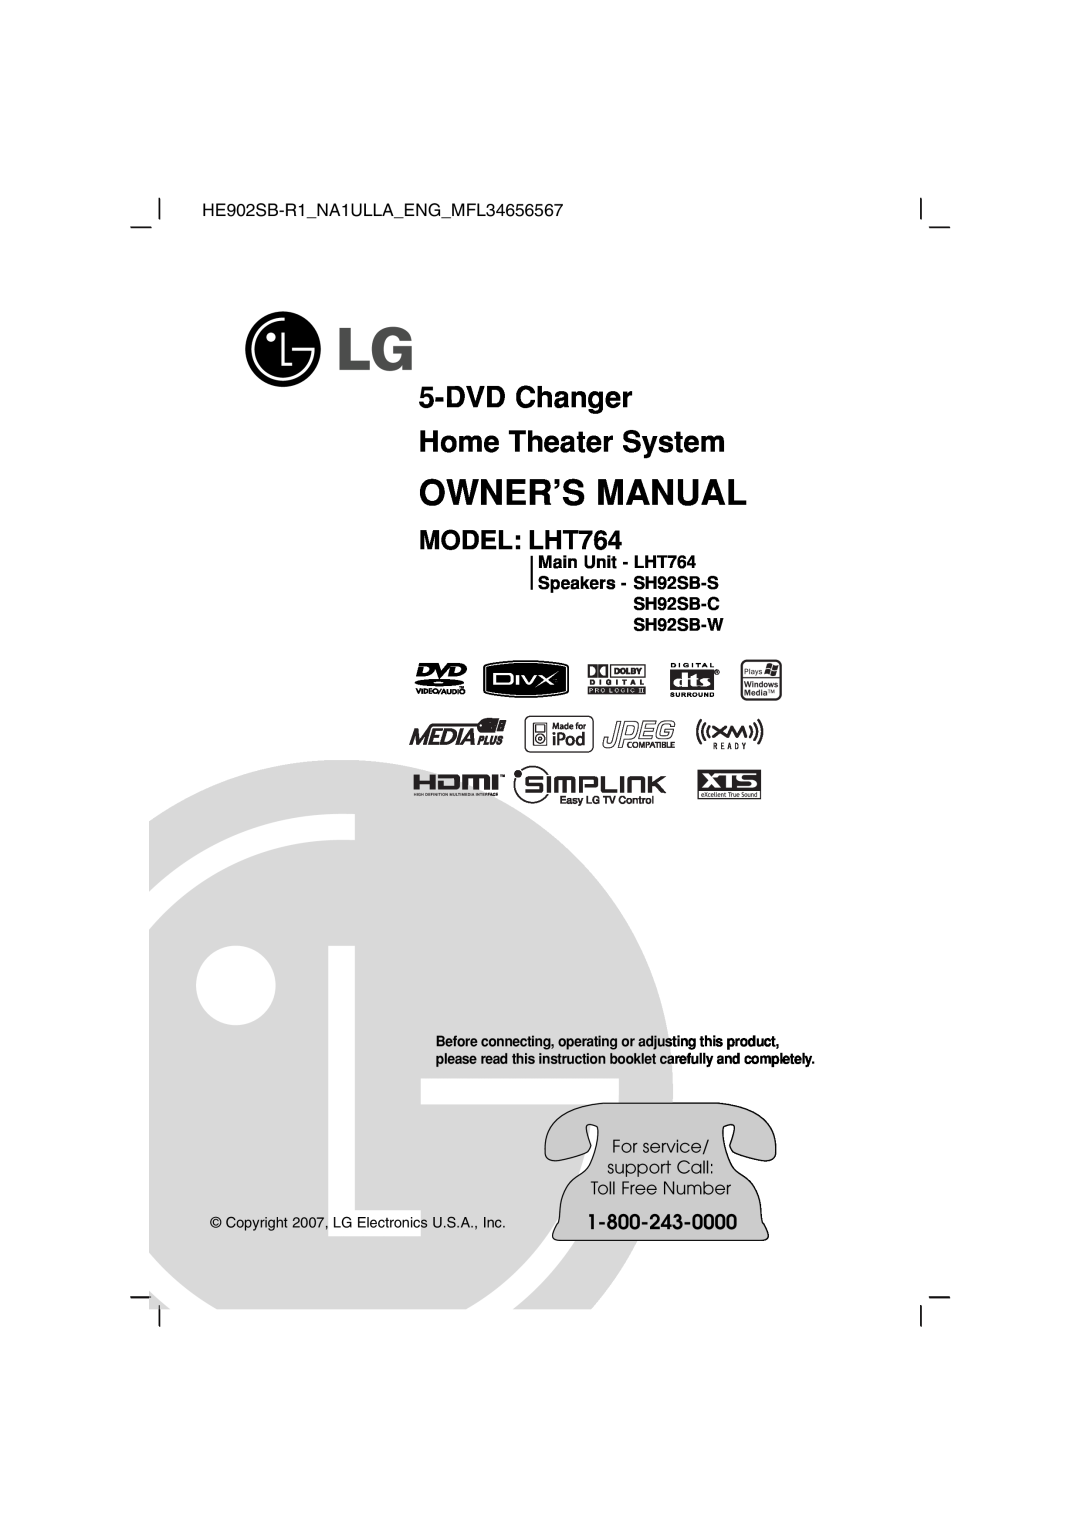 LG Electronics owner manual Owners Manual, DVDChanger Home Theater System, MODEL: LHT764, SH92SB-W 